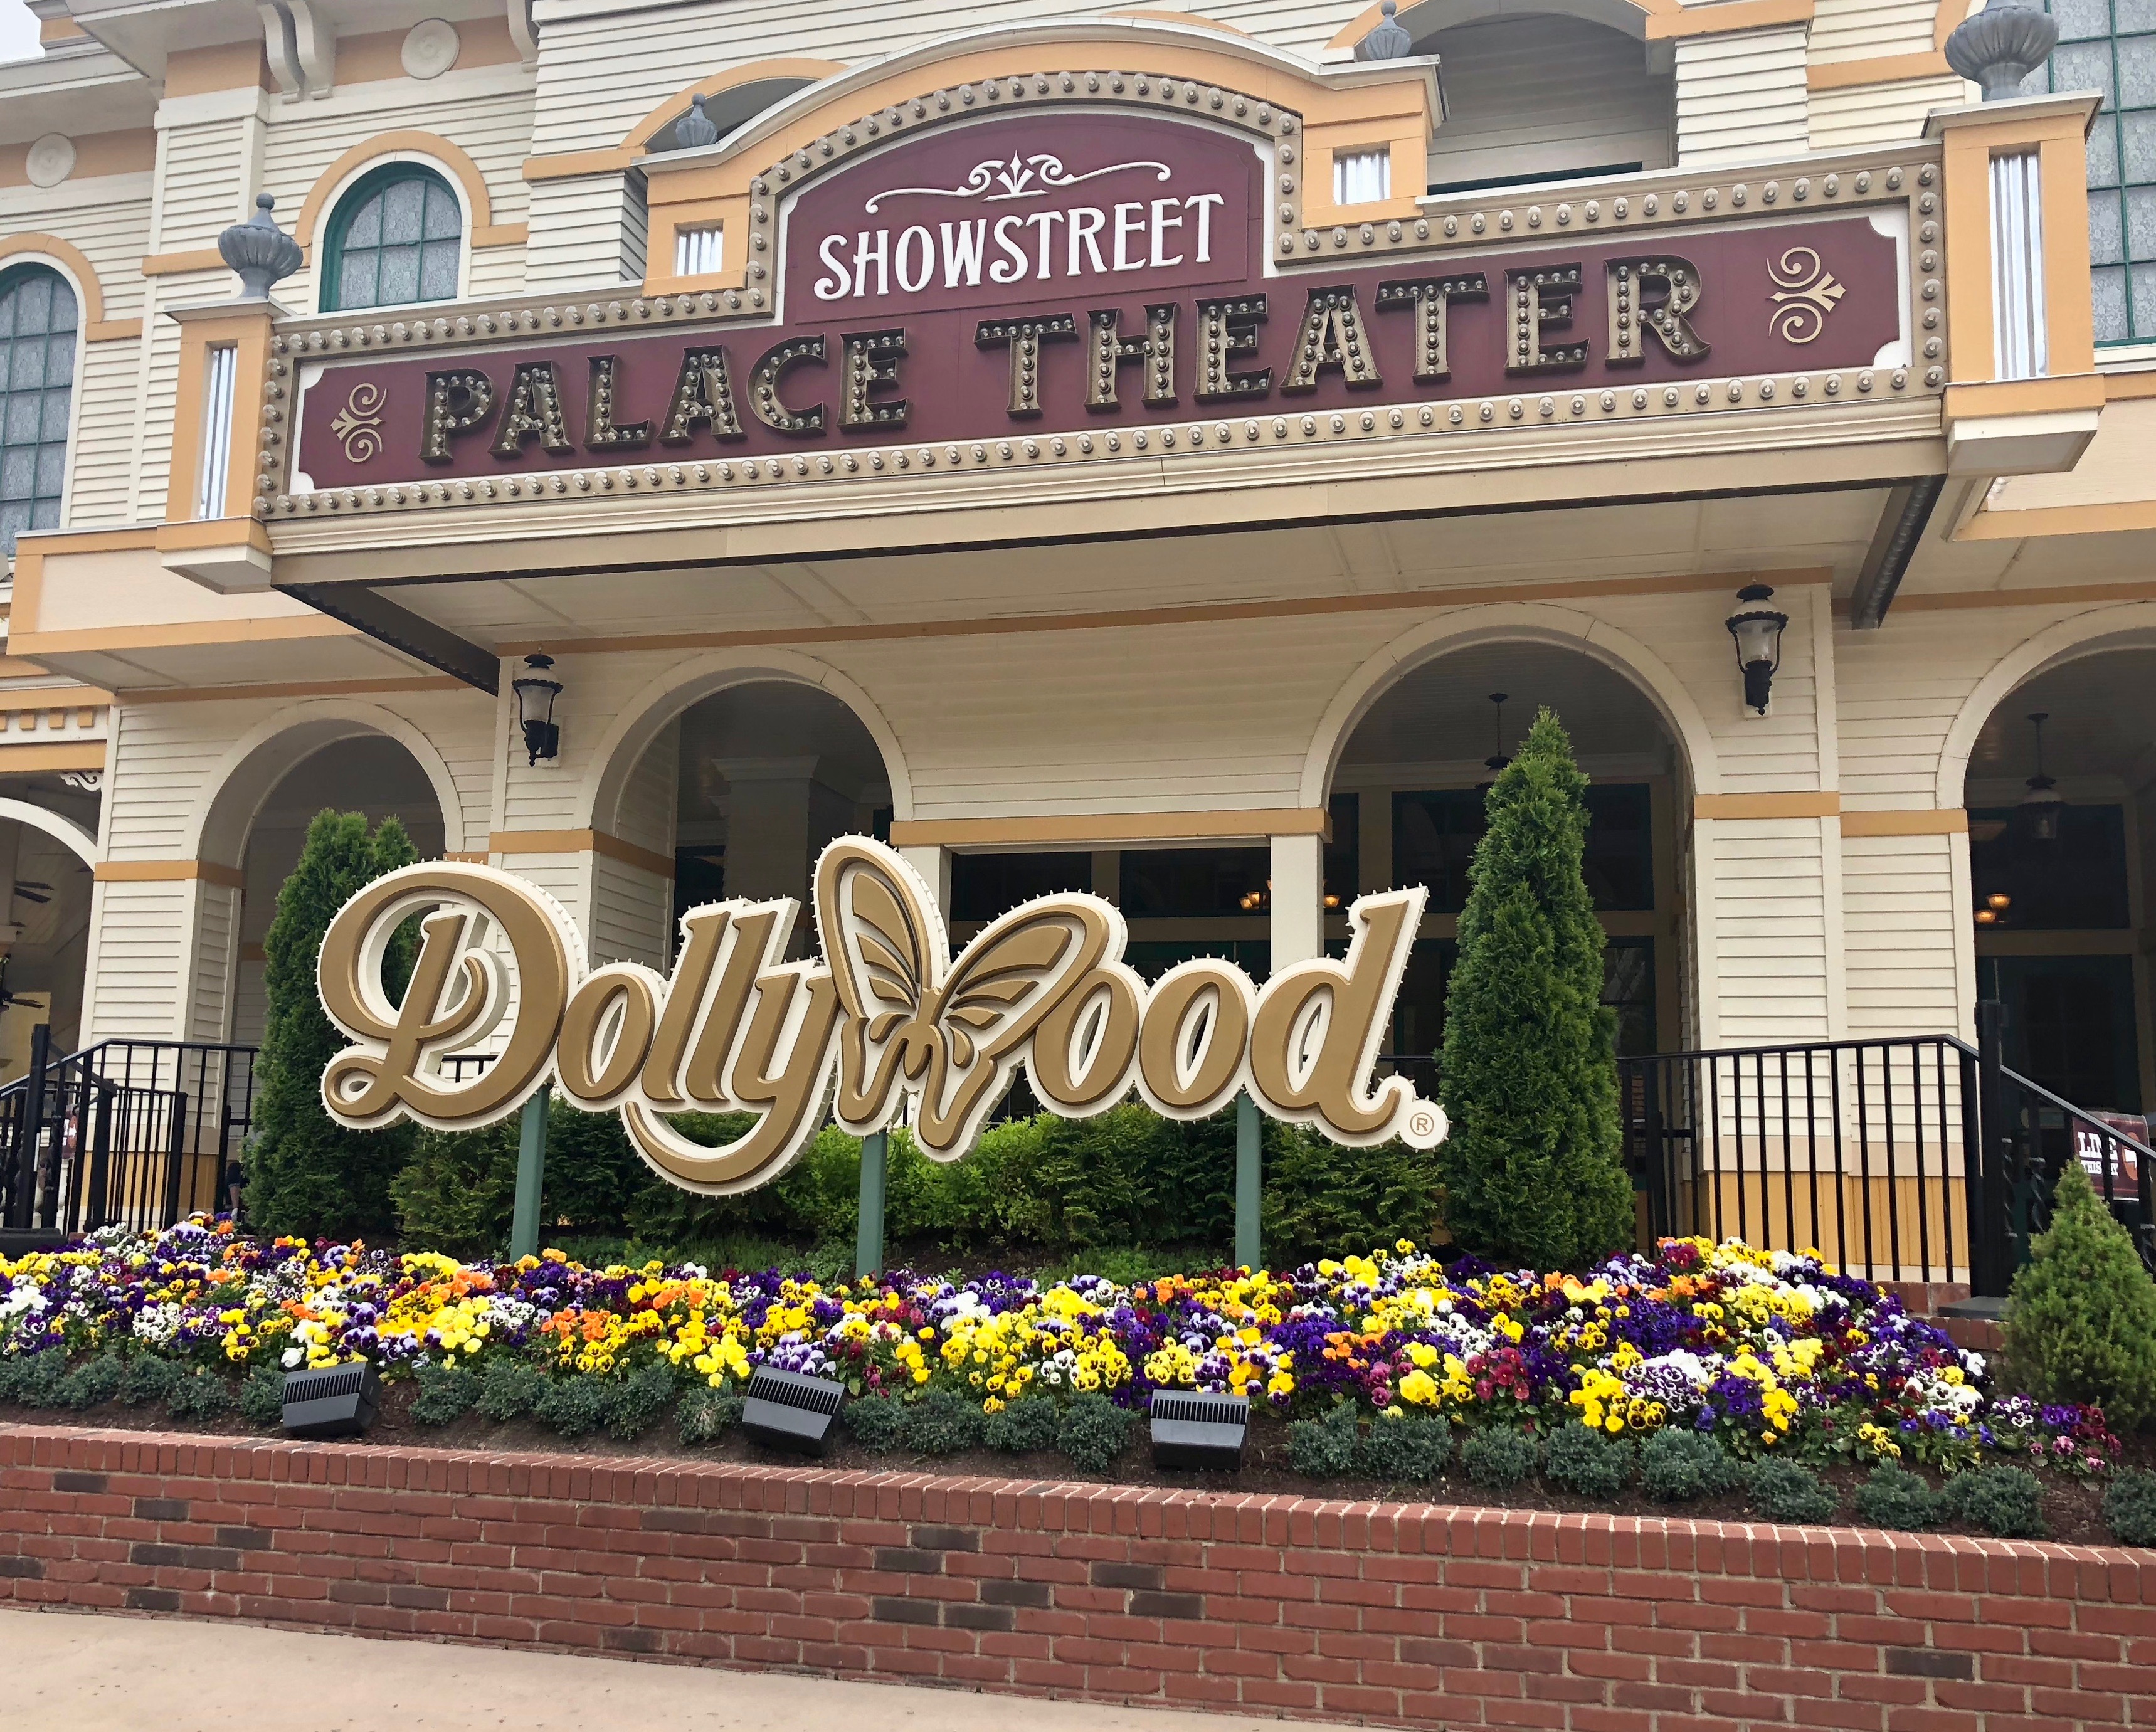 The Dollywood theme park sees roughly three million visitors per year. 